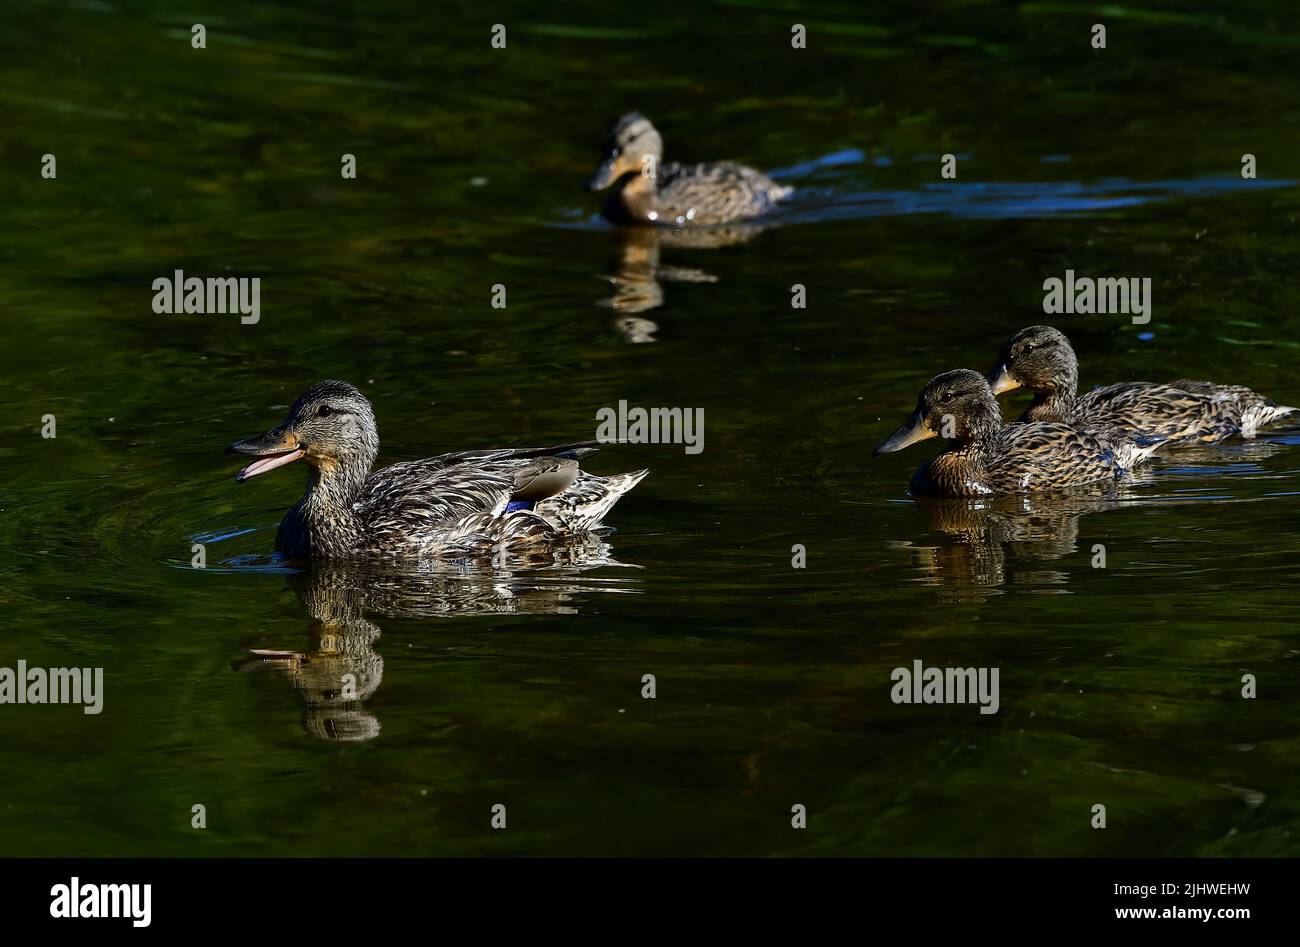 A mother Mallard duck ' Anas platyrhynchos', leading her brood through the calm waters of a rural Alberta Lake Stock Photo